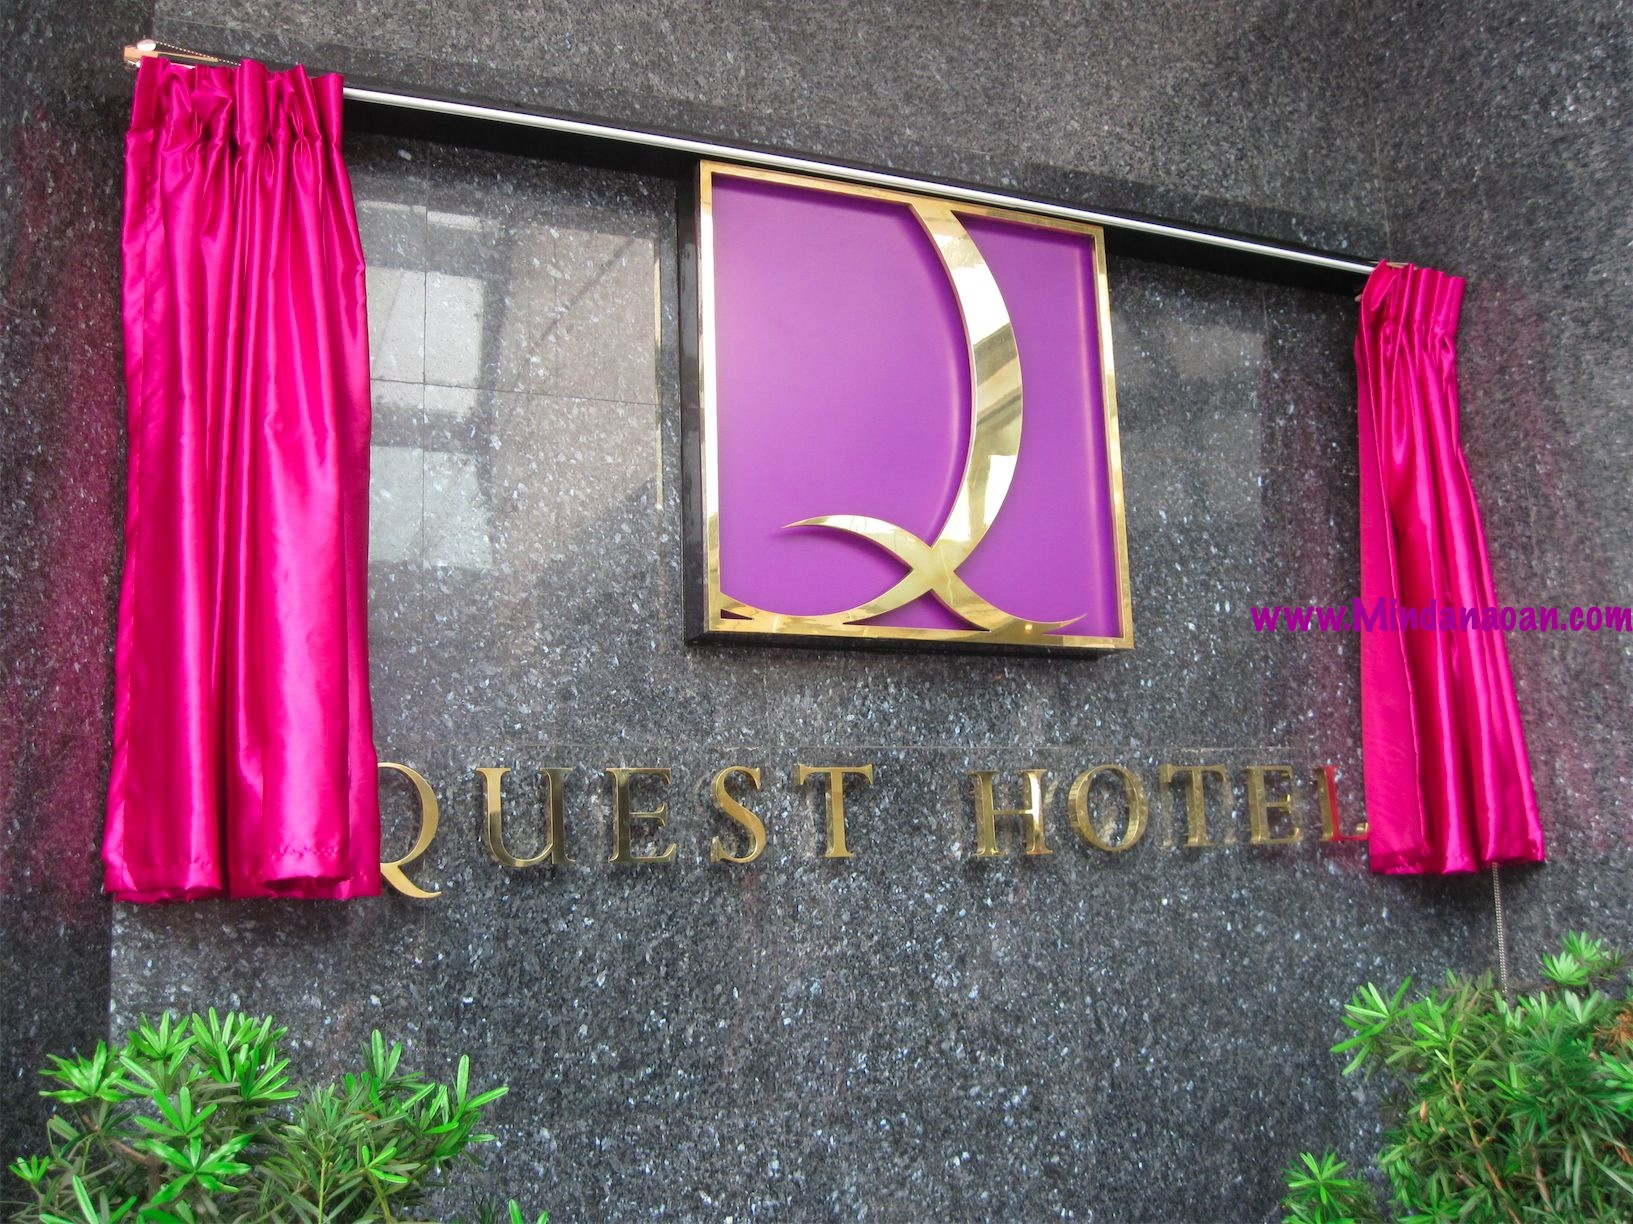 Quest Cebu Hotel joins Cagayan Travel Exchange, trip to Bali up for grabs